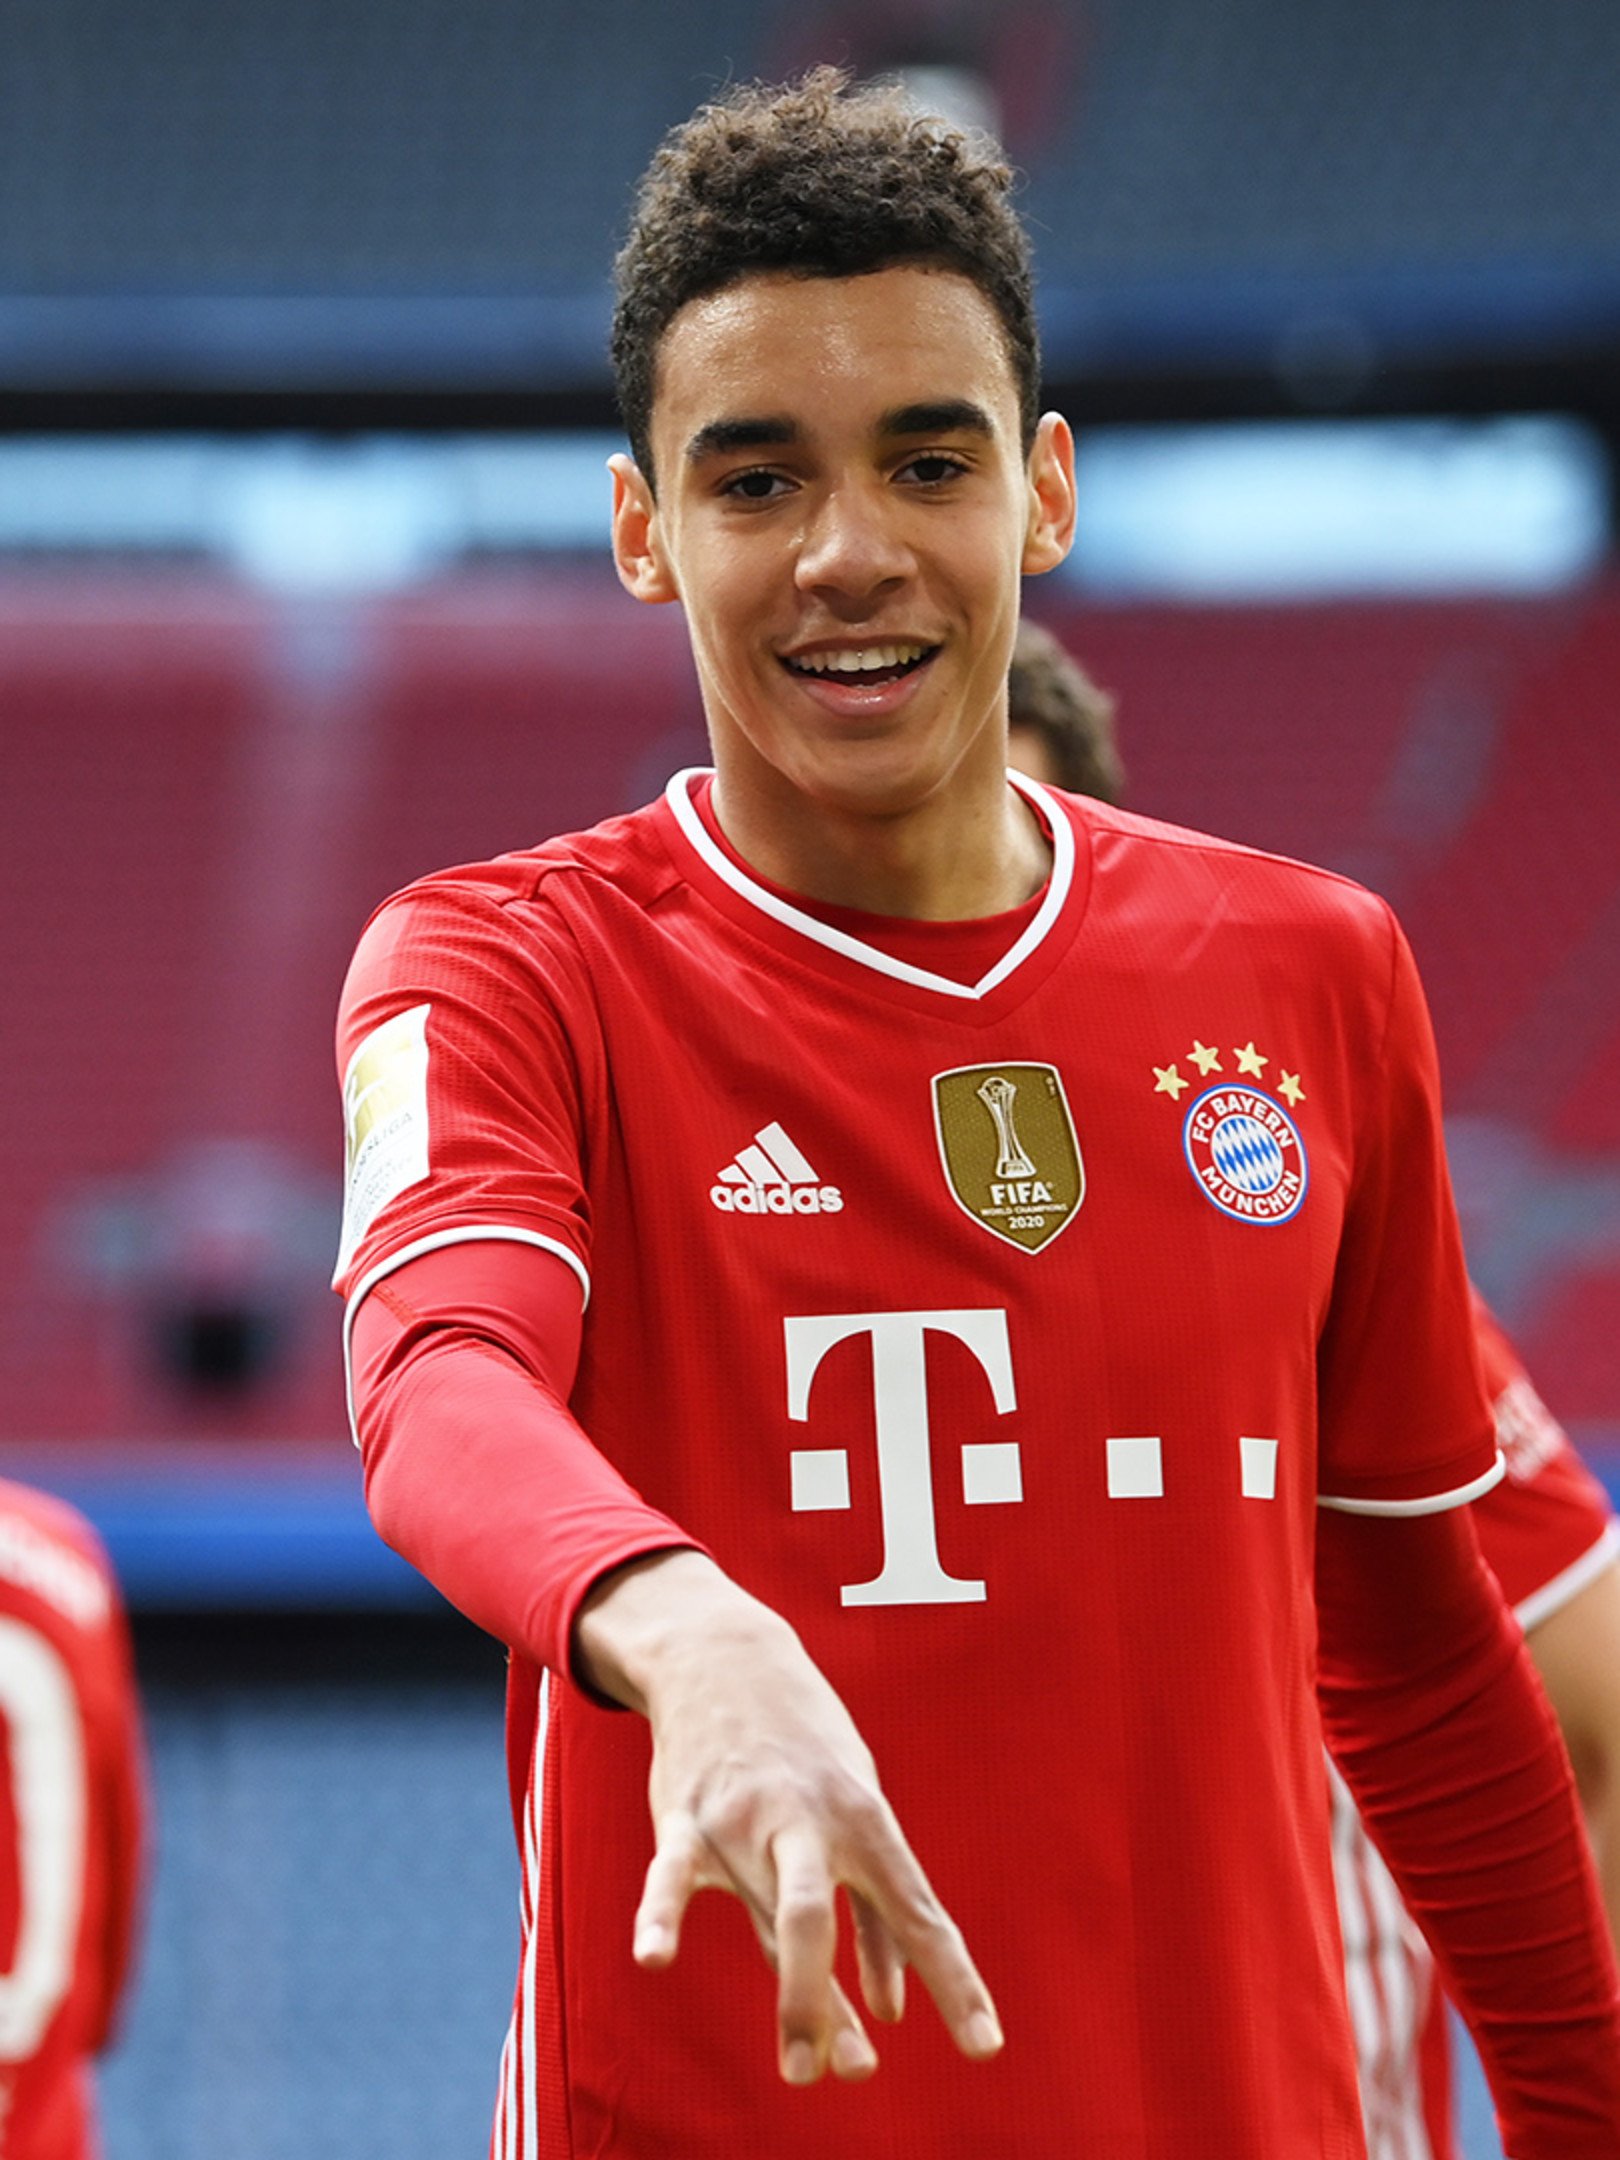 Jamal Musiala: FC Bayern Player of the Month, April 2021